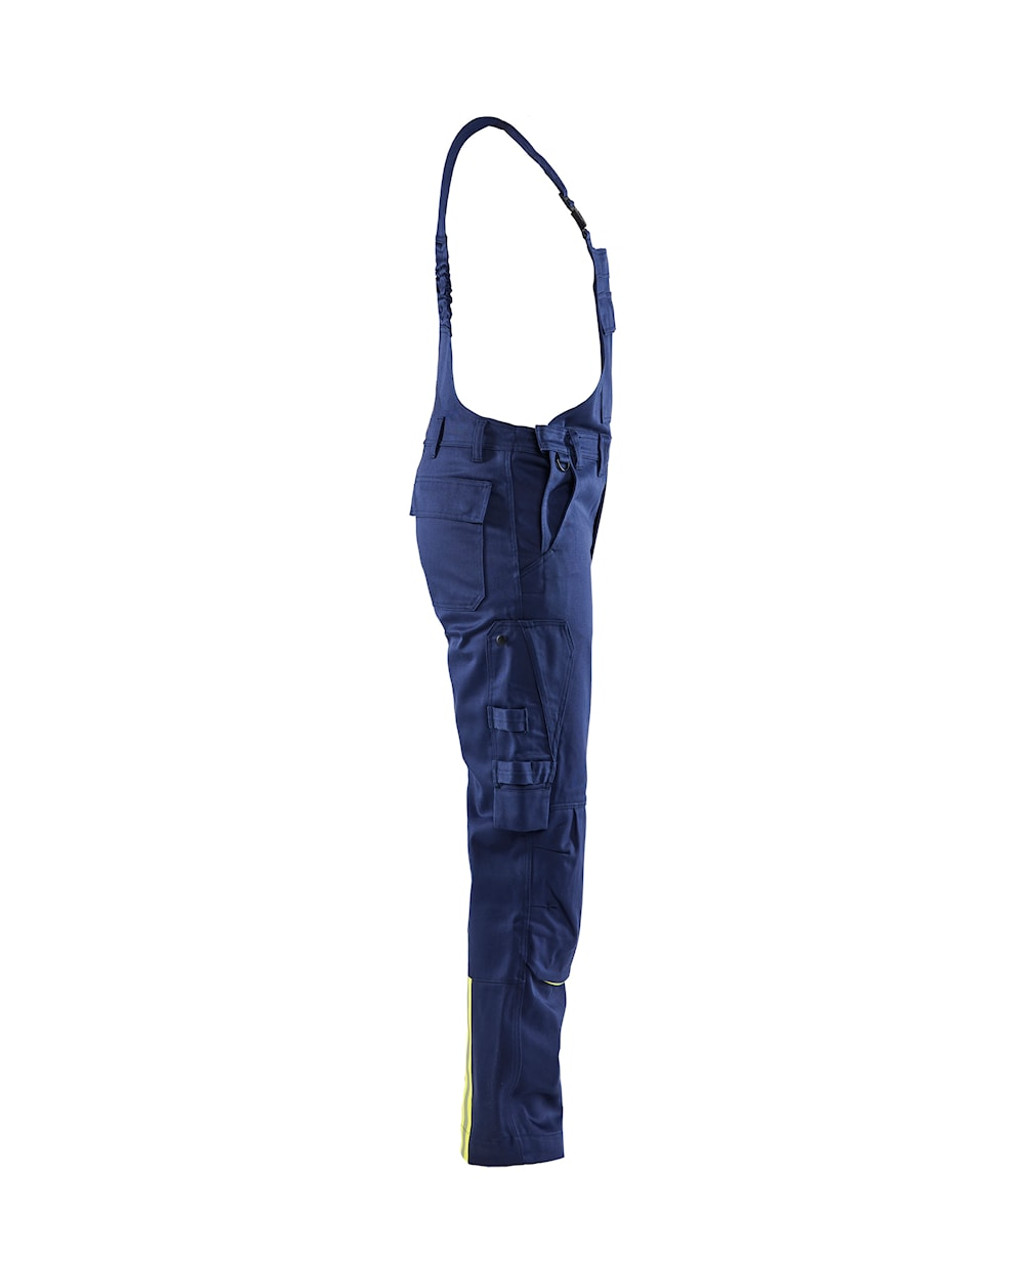 BLAKLADER Cotton with Stretch Navy Blue Overalls  for Electricians that have Kneepad Pockets  available in Australia and New Zealand